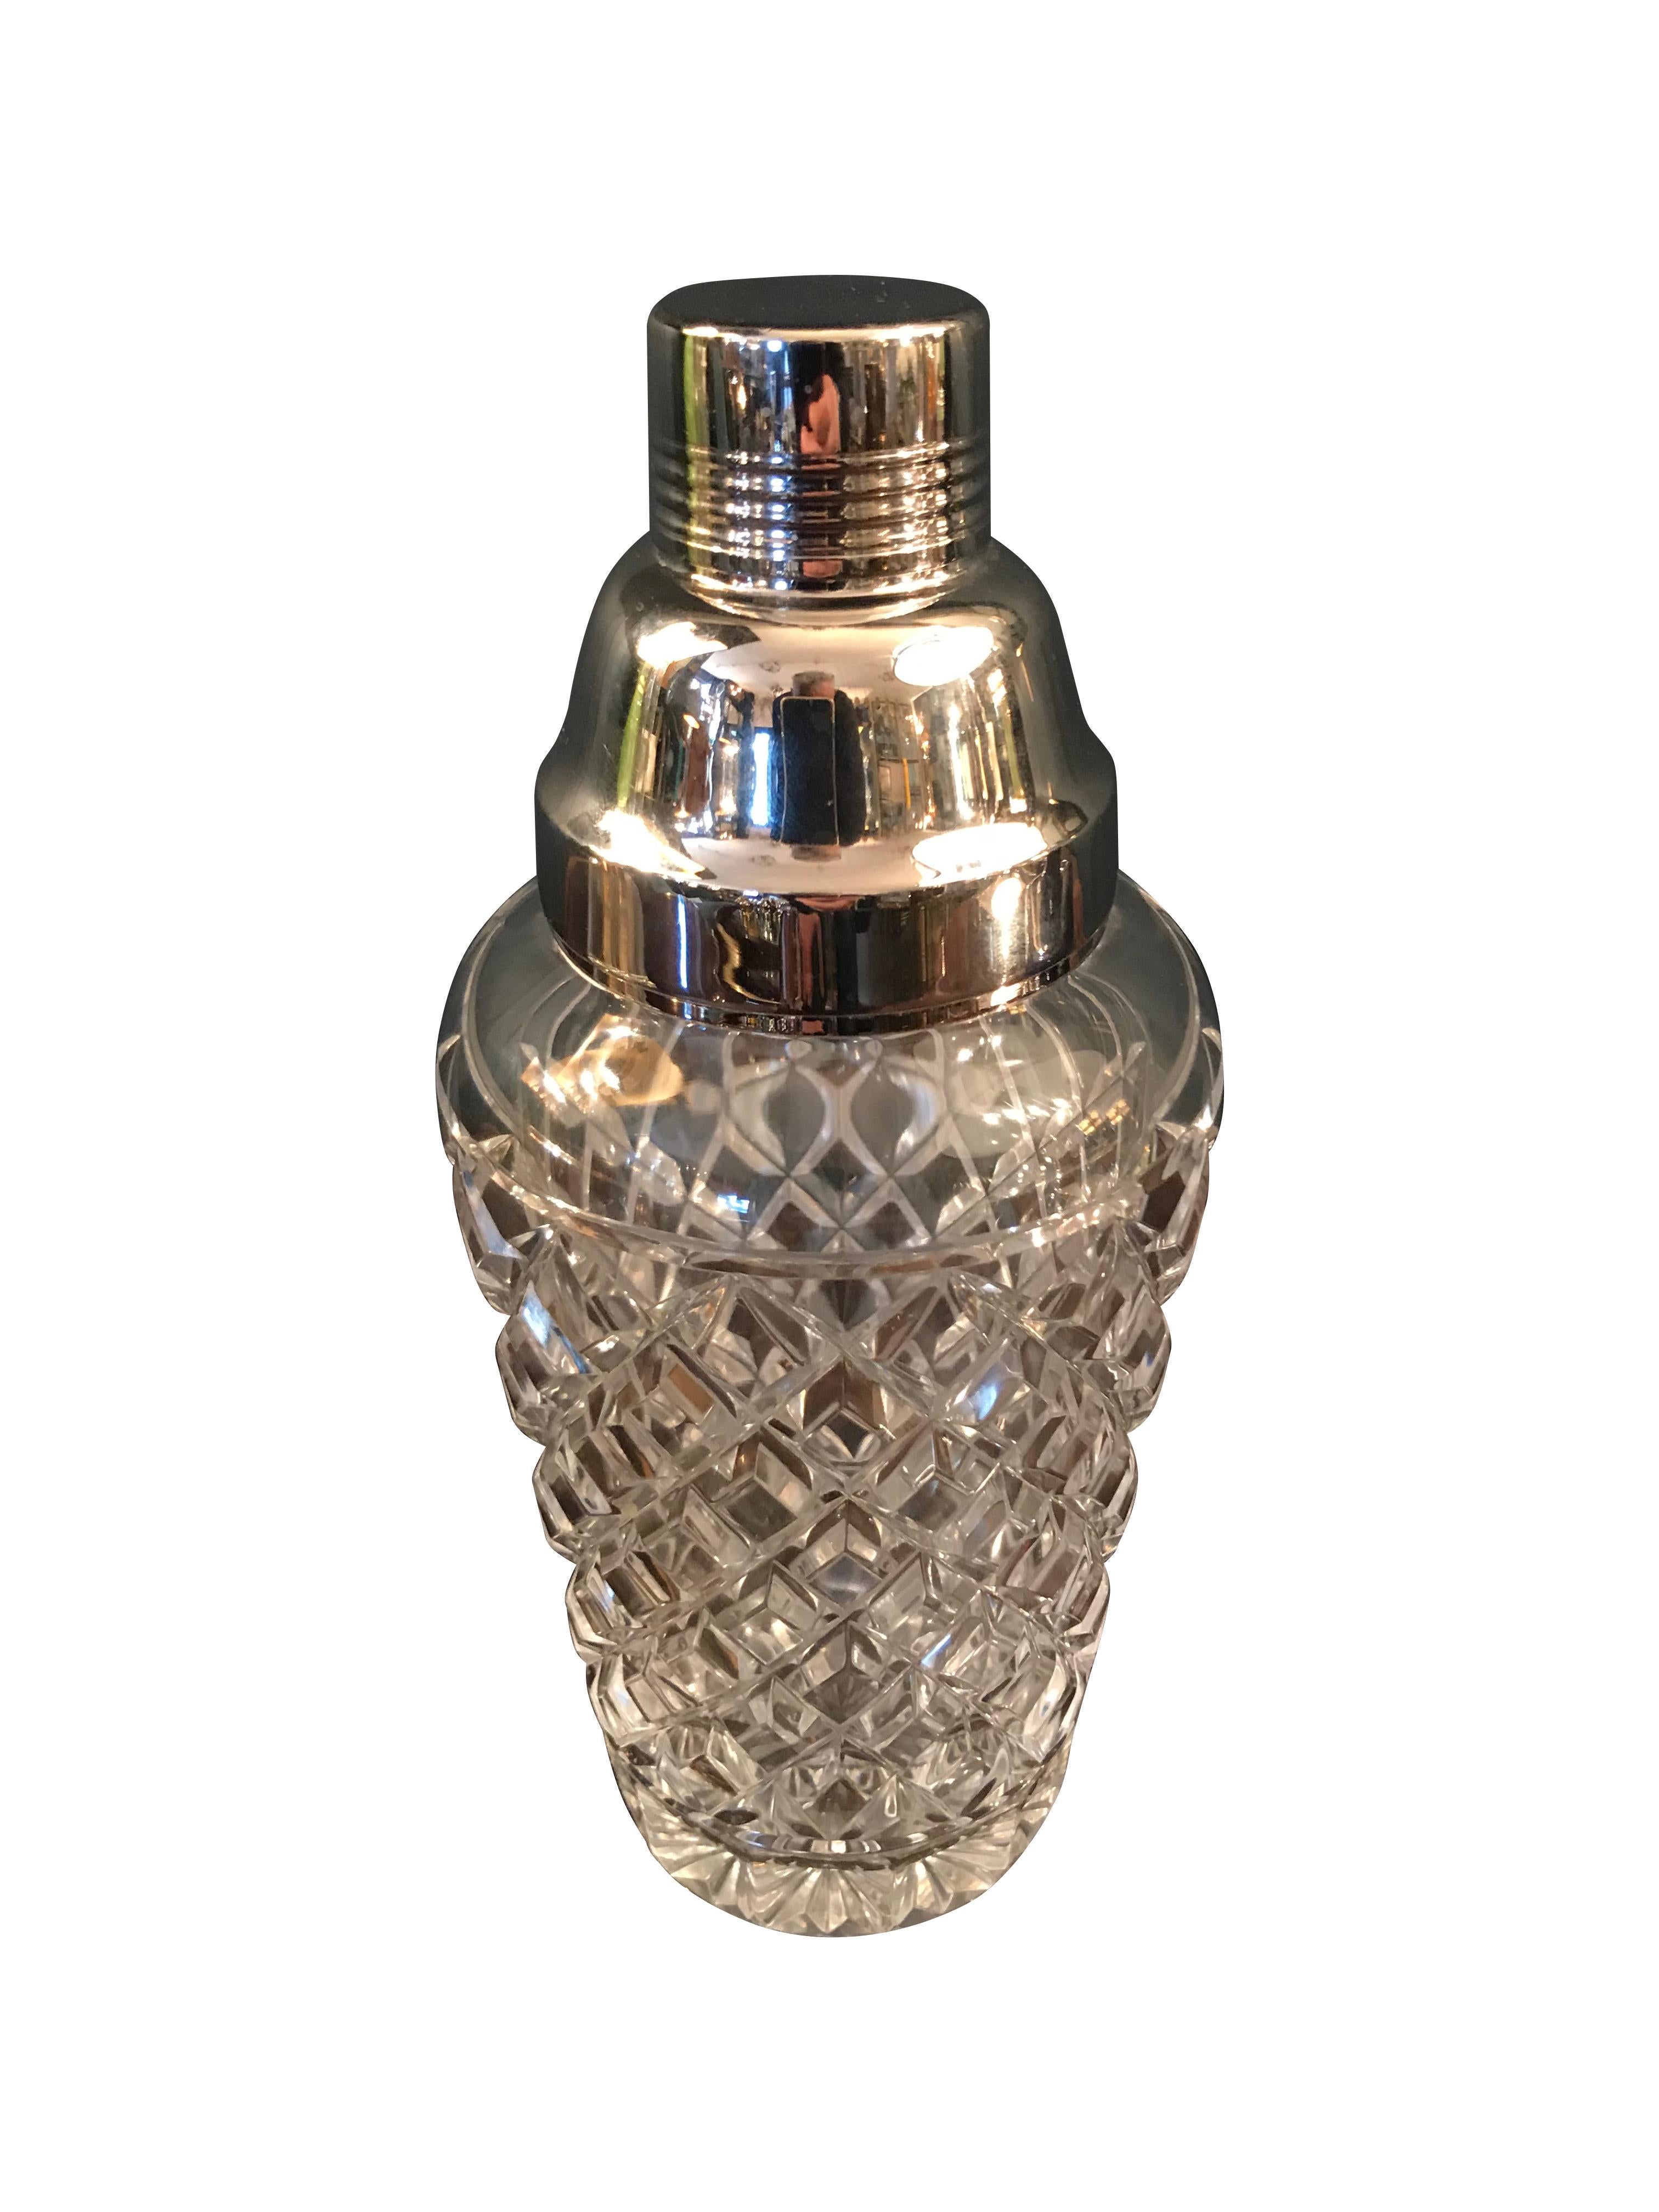 A Val St Lambert rhodium plated and crystal glass cocktail Shaker with diamond faceted detail. The top separates into two parts with a lid and stainer top that fits onto the metal rim. 

Rhodium is a rare and precious element that can be 10 to 25